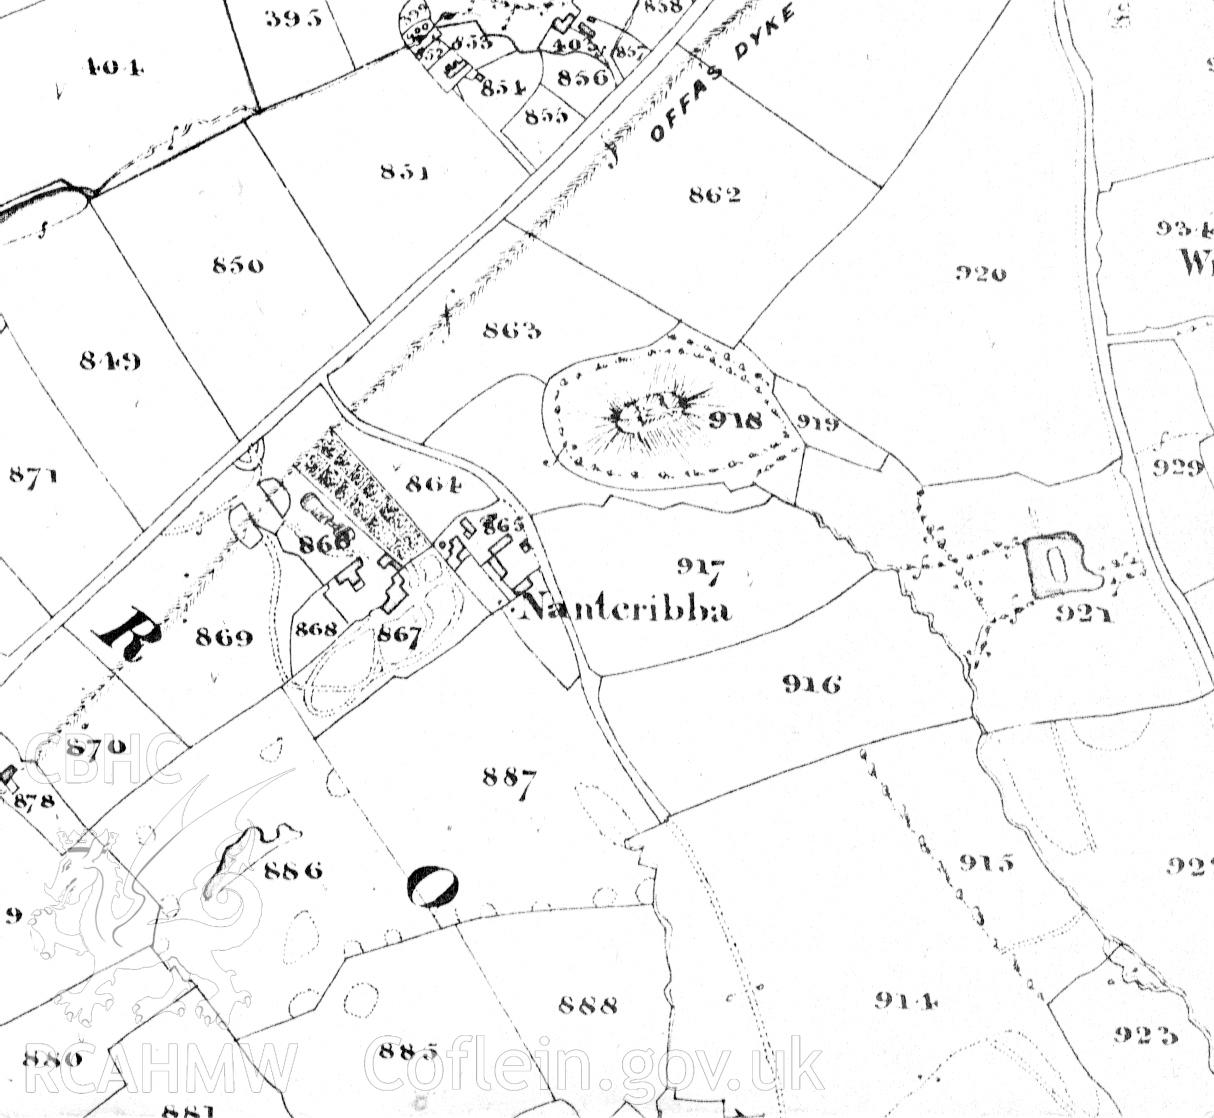 Tithe map showing Nantcribbau Farm, Forden, Powys. Used as part of archaeological desk based assessment and building recording of undertaken by Archaeology Wales in March 2013. Report no. 1108.